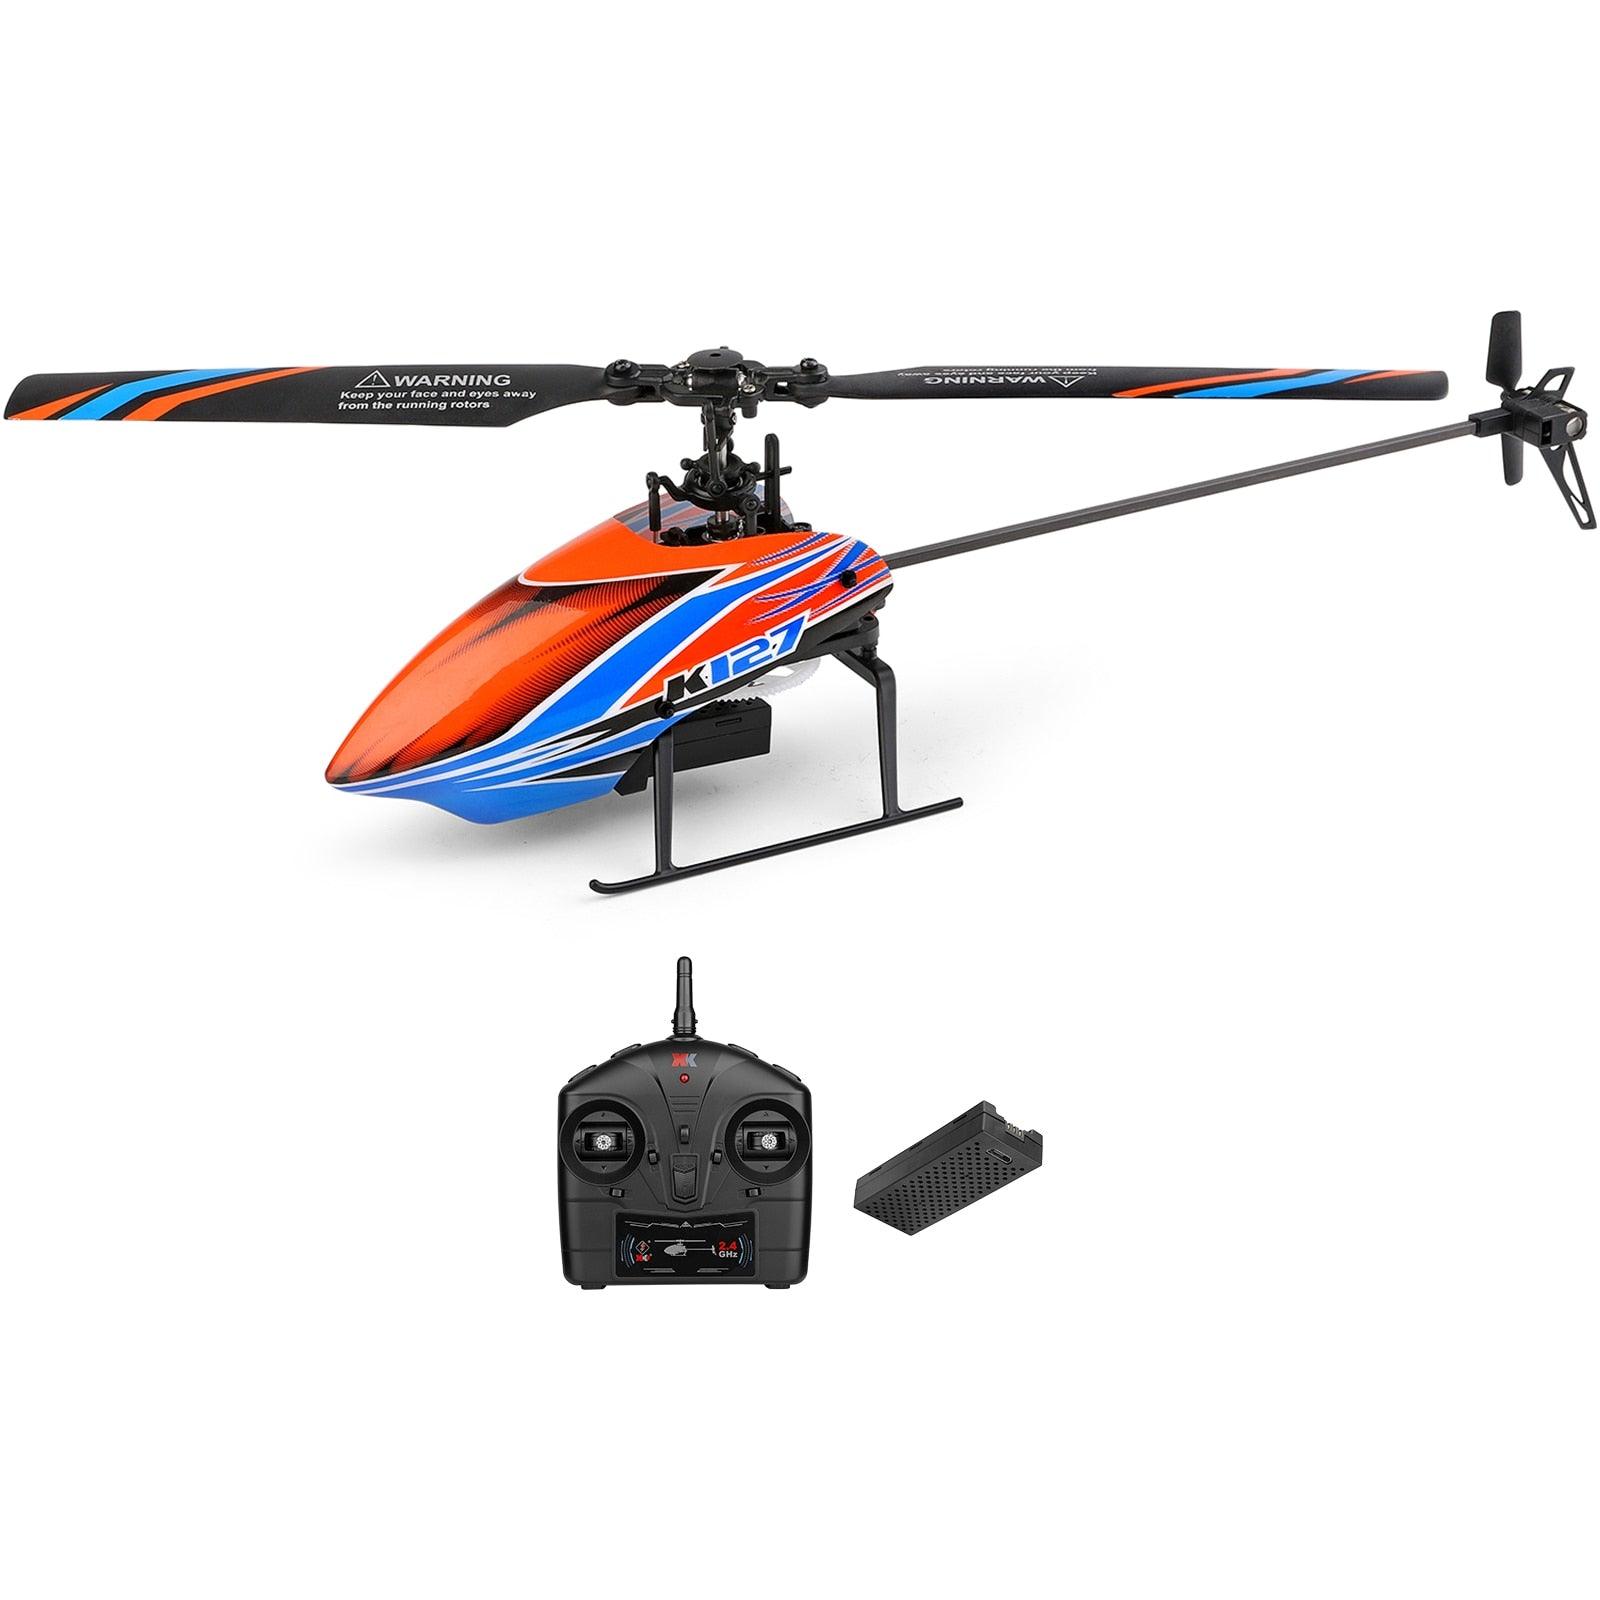 Wltoys K127 Rc Helicopter - V911S Upgraded 2.4G 4CH 6G 6-Axis Gyro Aileronless RC Helicopter RTF RC Airplane Children&#39;s Gift Fun - RCDrone